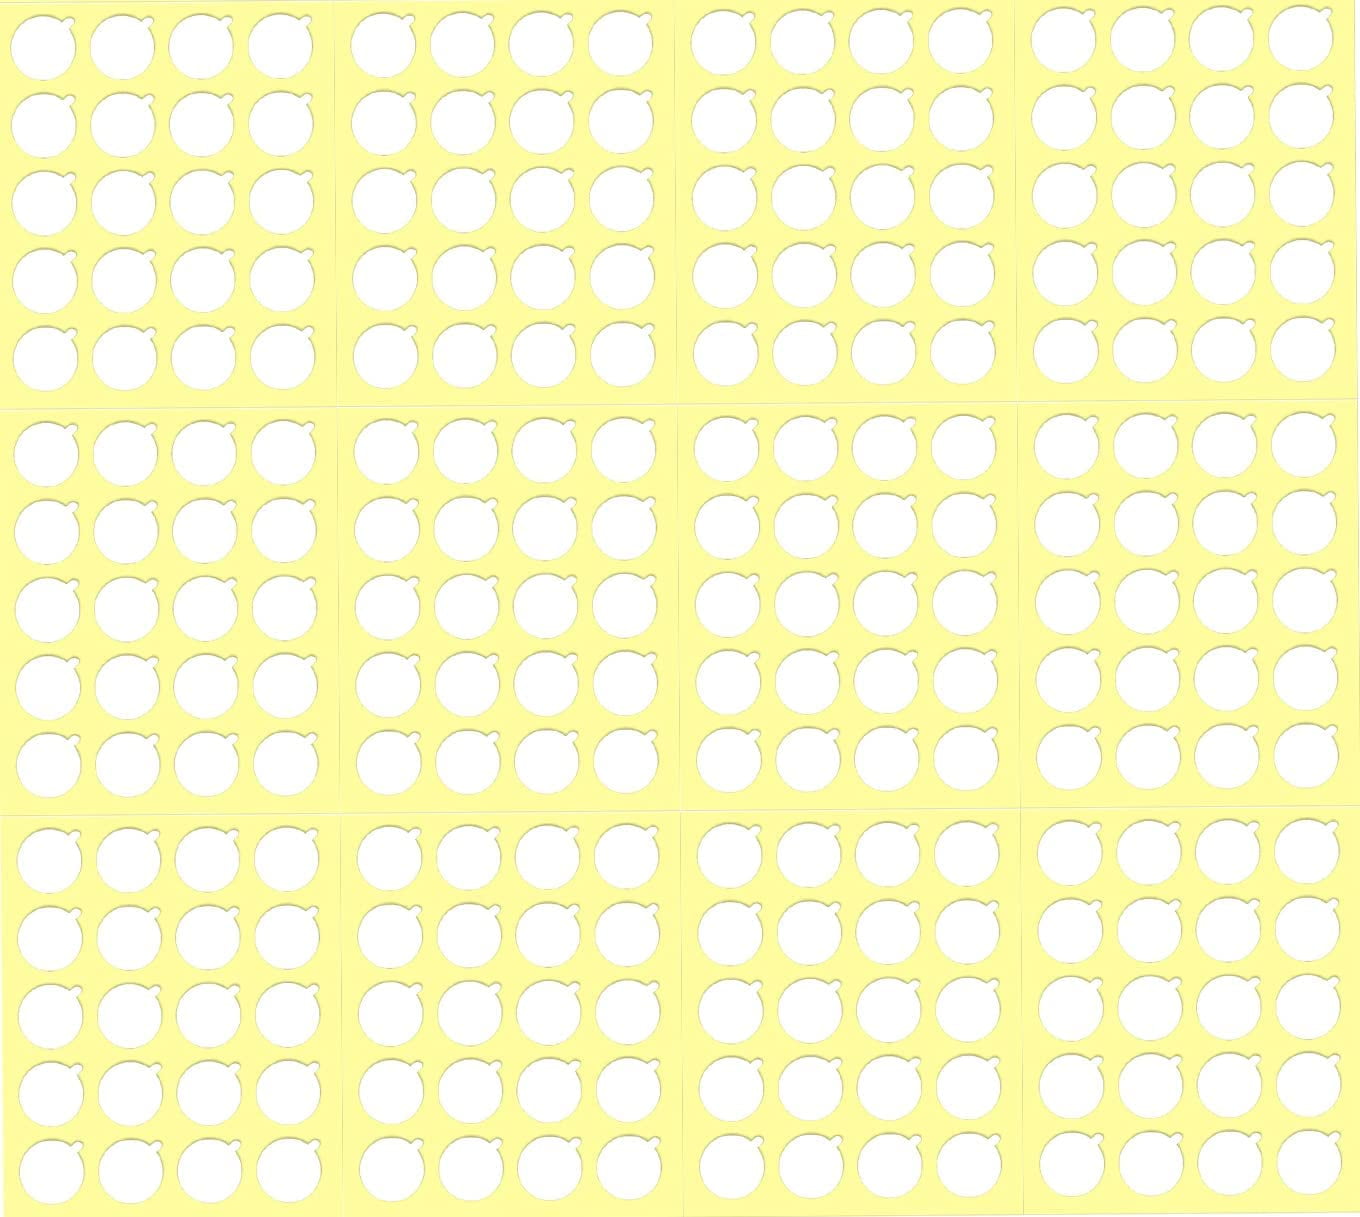 Oderol Lianxiao - 300pcs Candle Wick Stickers Heat Resistant Stickers Double Sided Stickers for Candle Making 15 Sheets (Color : Yellow 300pcs)